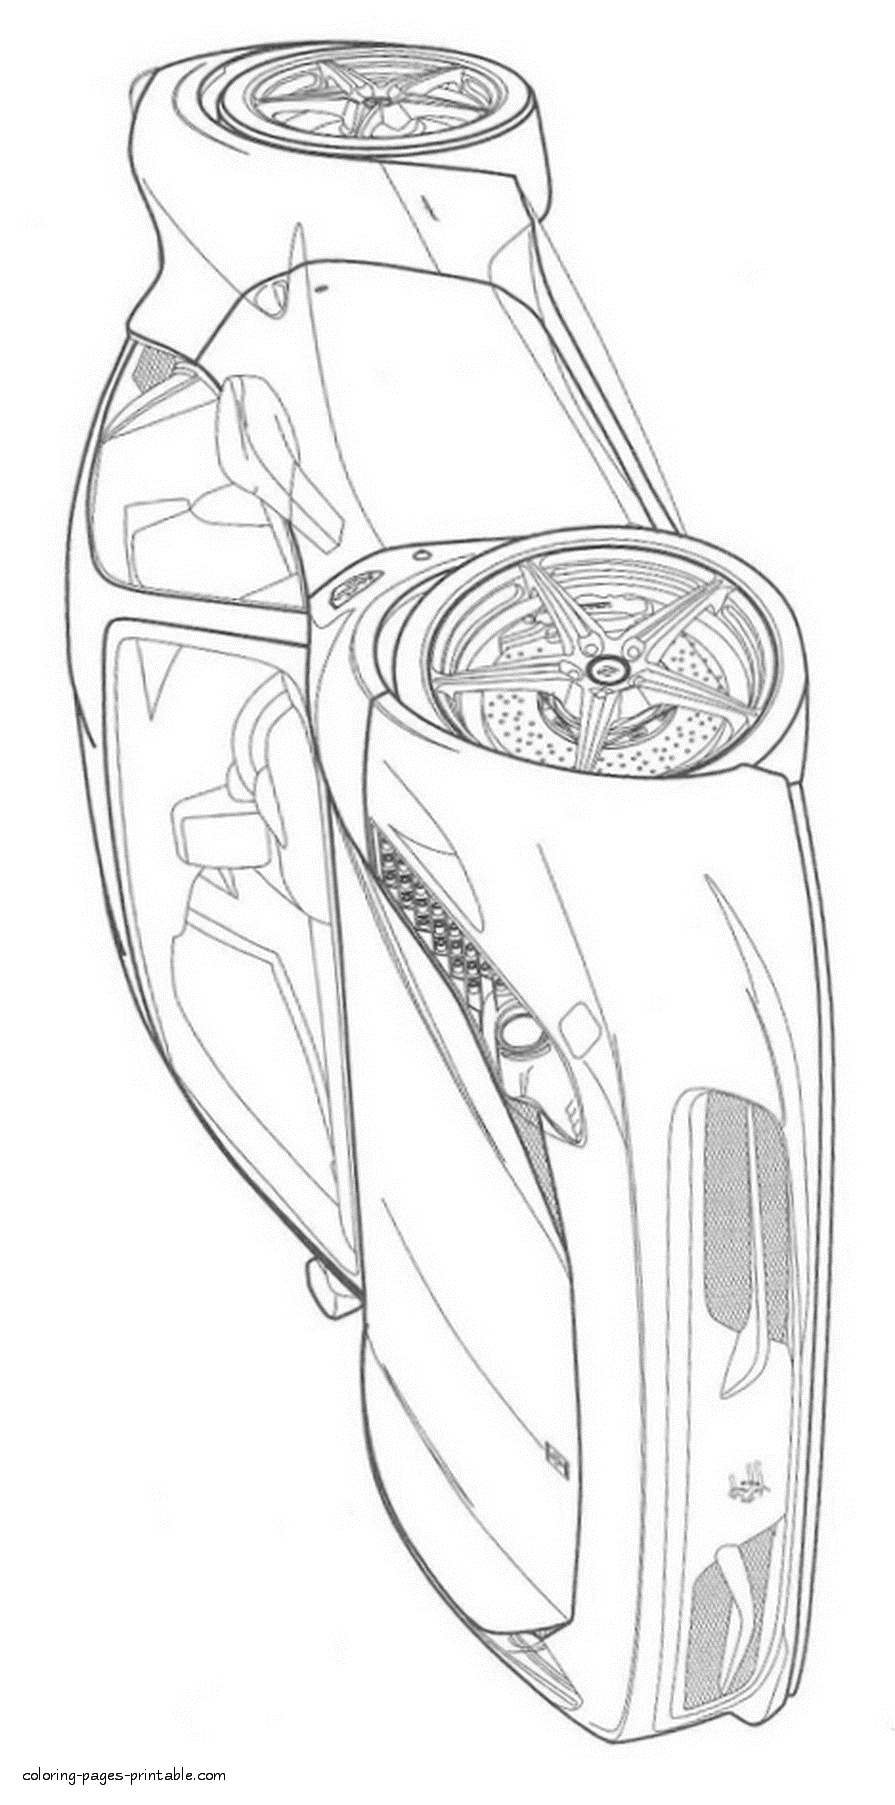 The best sportscars coloring pages. Ferrari printables